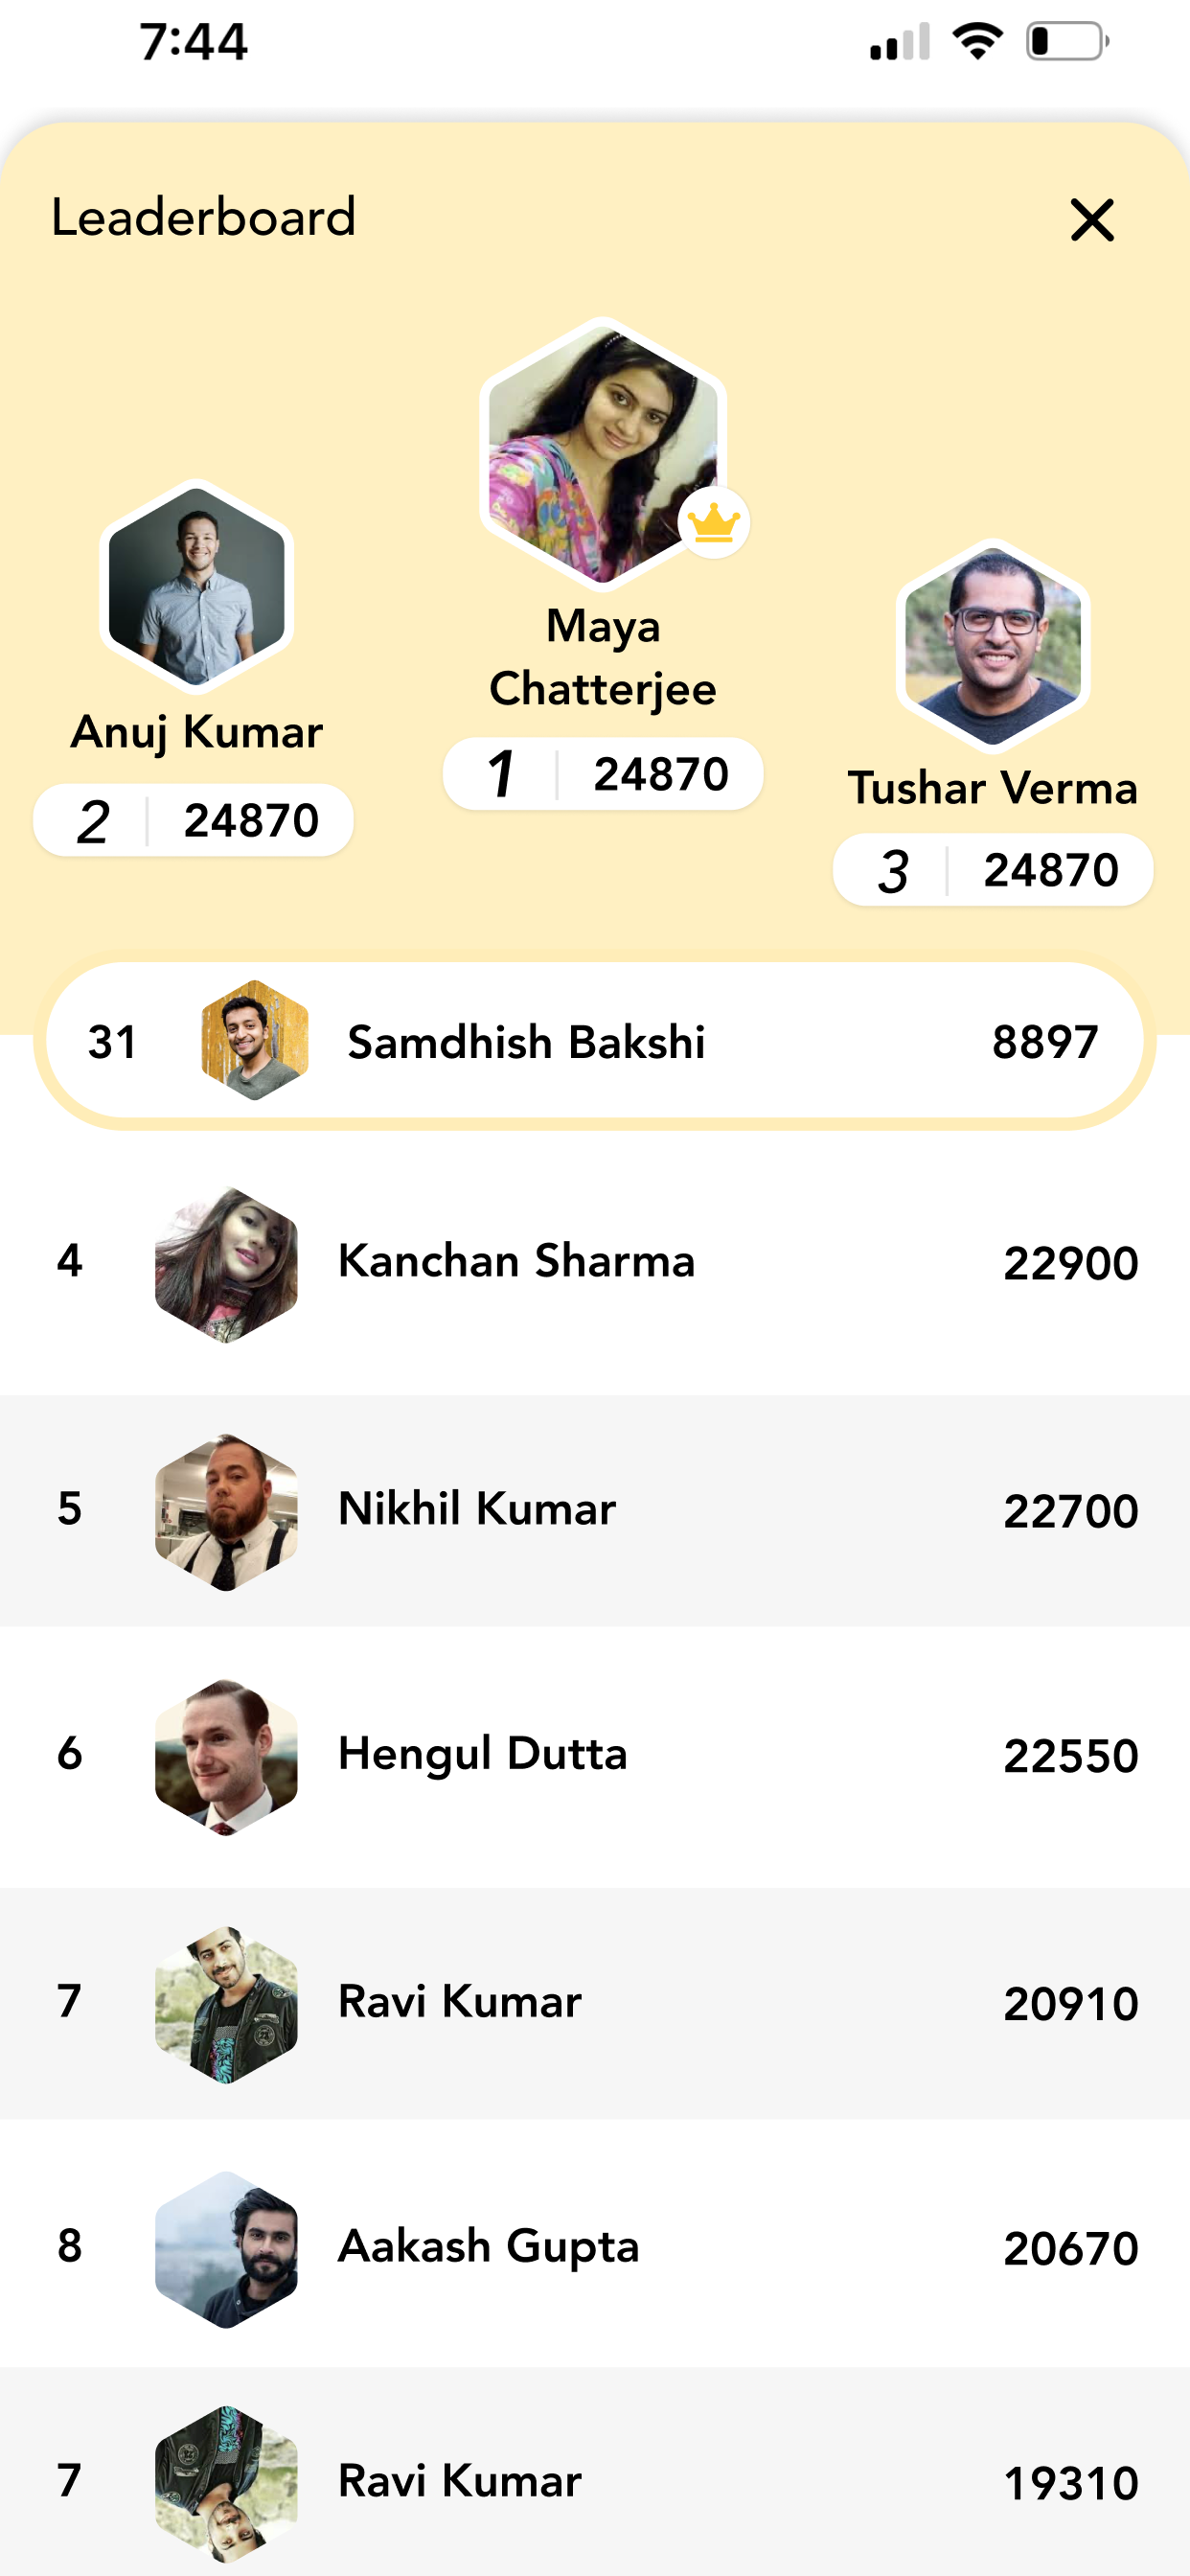 BHyve is built to rewards employees know share as well as seek knowledge. BHyve's gamification module offers a dynamic, company-wide leaderboard that makes learning fun as well as rewarding for employees!